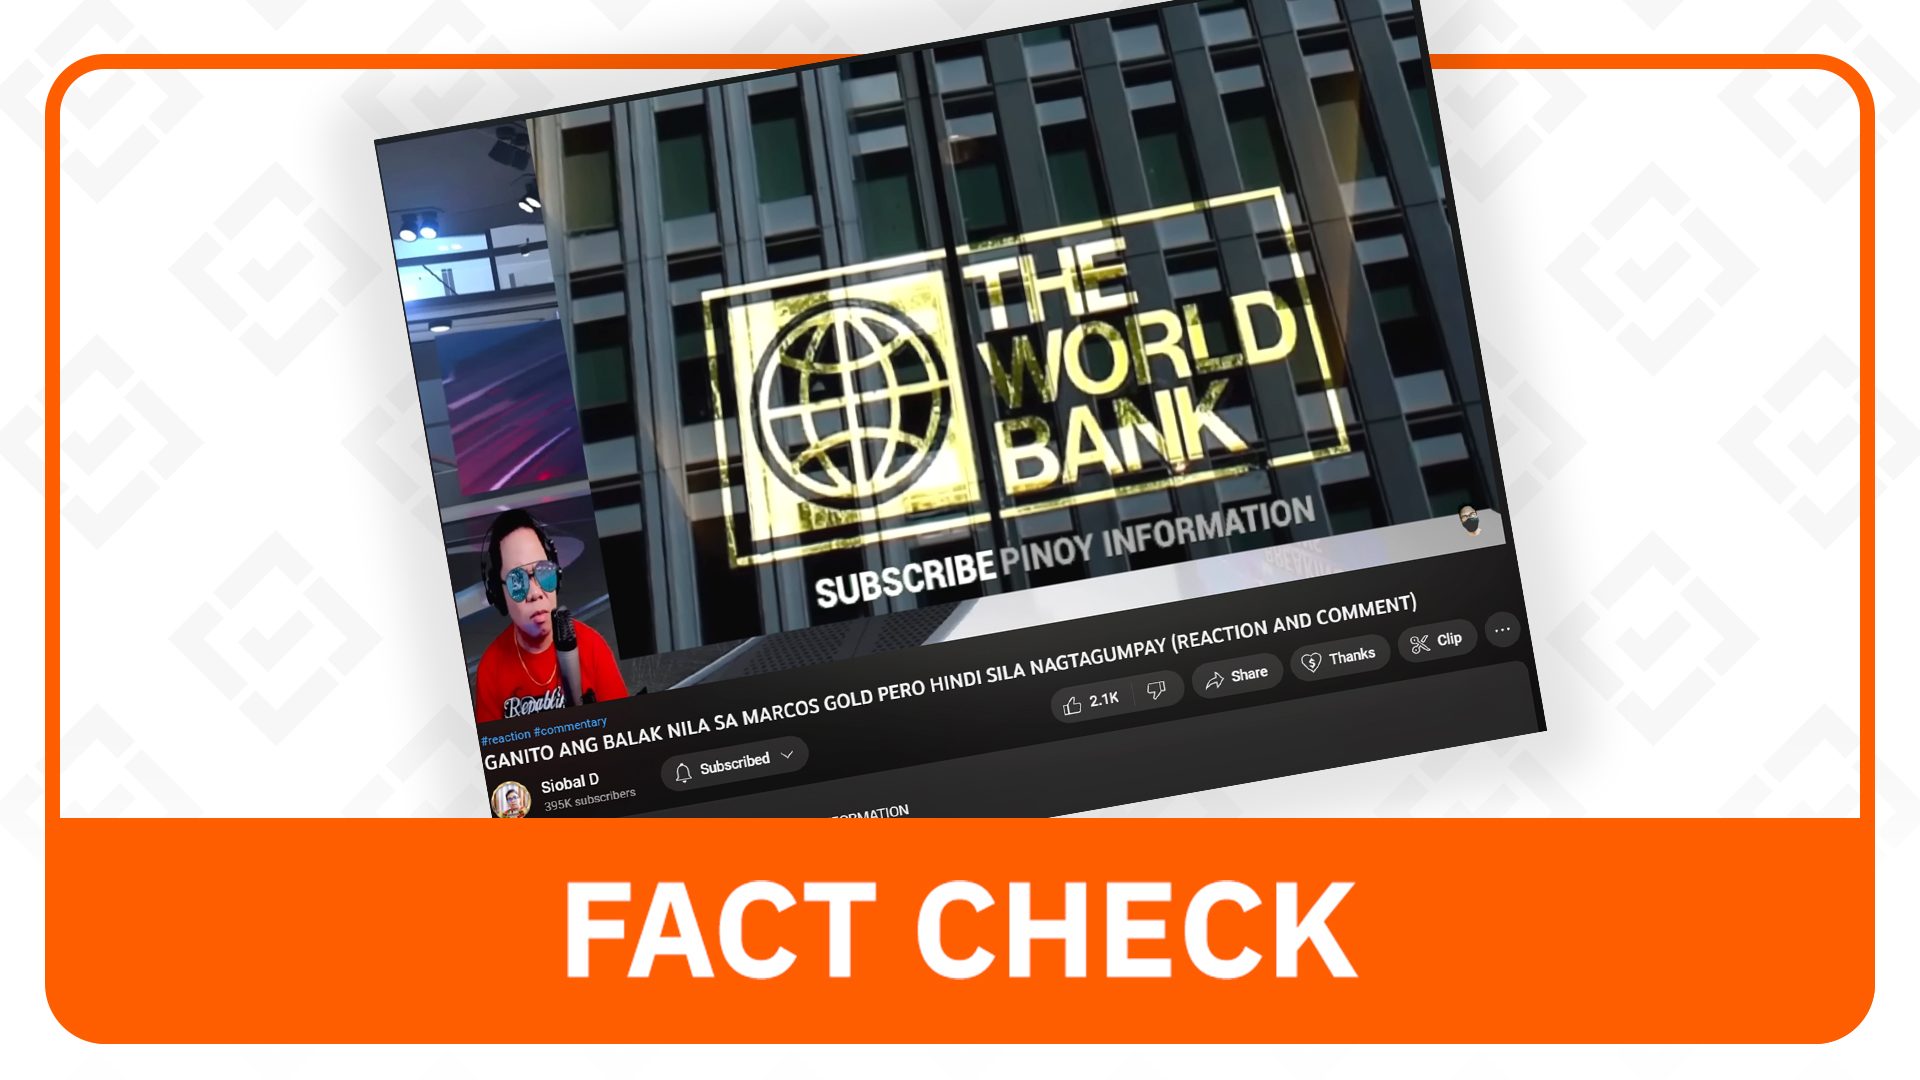 FACT CHECK: World Bank doesn’t have Marcos gold deposits